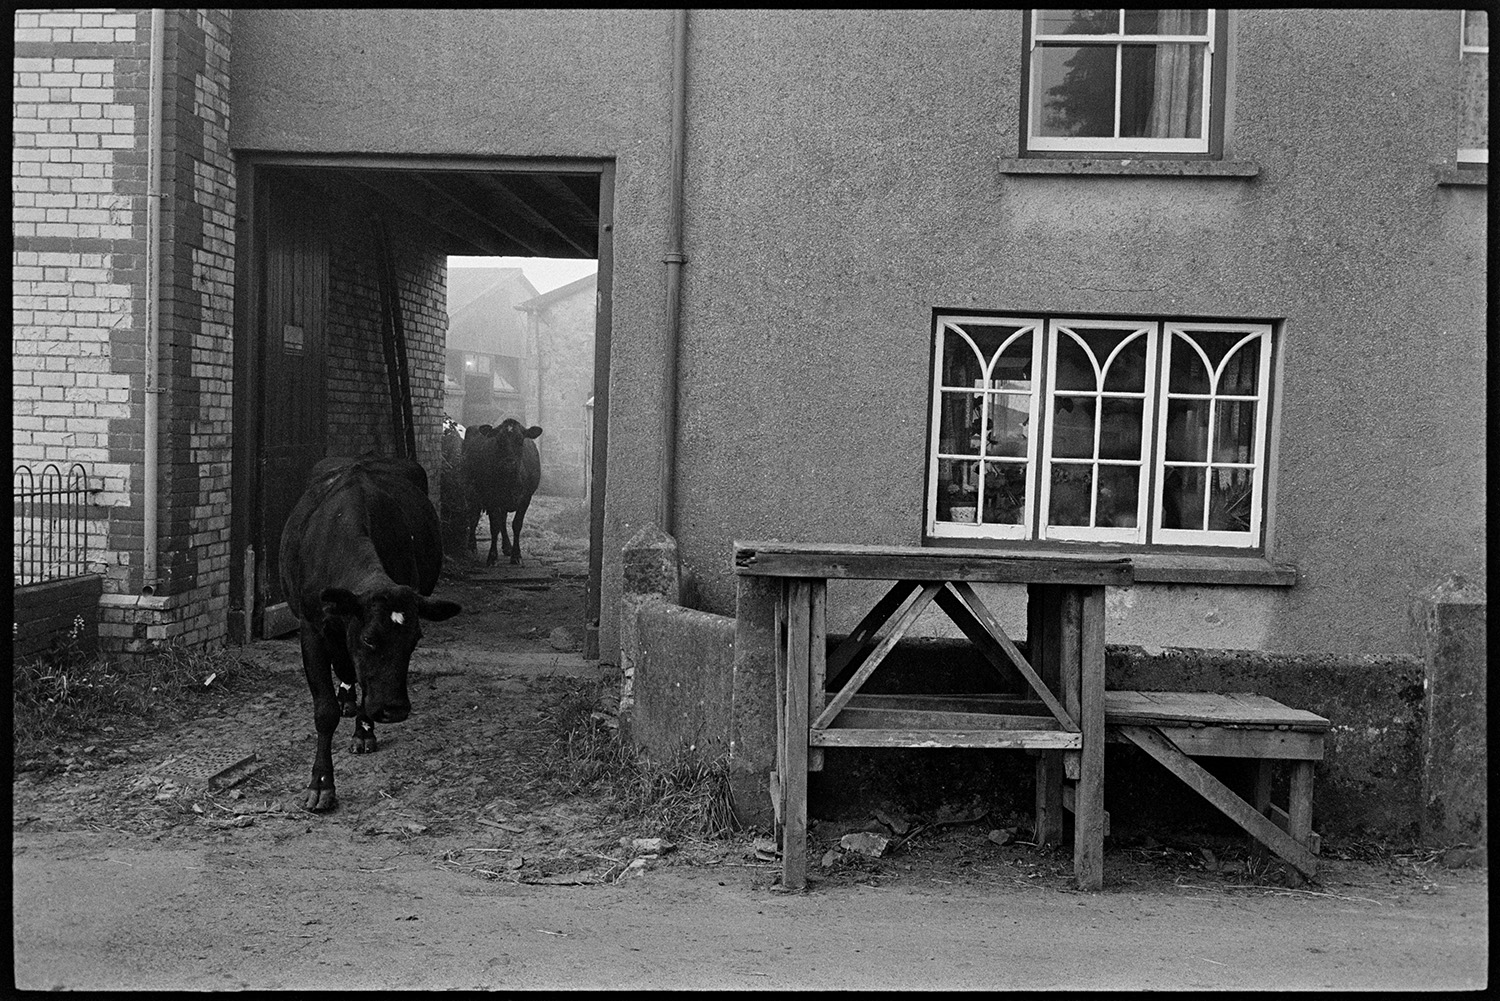 Cows leaving farm past milk stand and nice window. 
[Cows walking under an archway and past a milk churn stand, by a decorative window, in East Street, Sheepwash.]